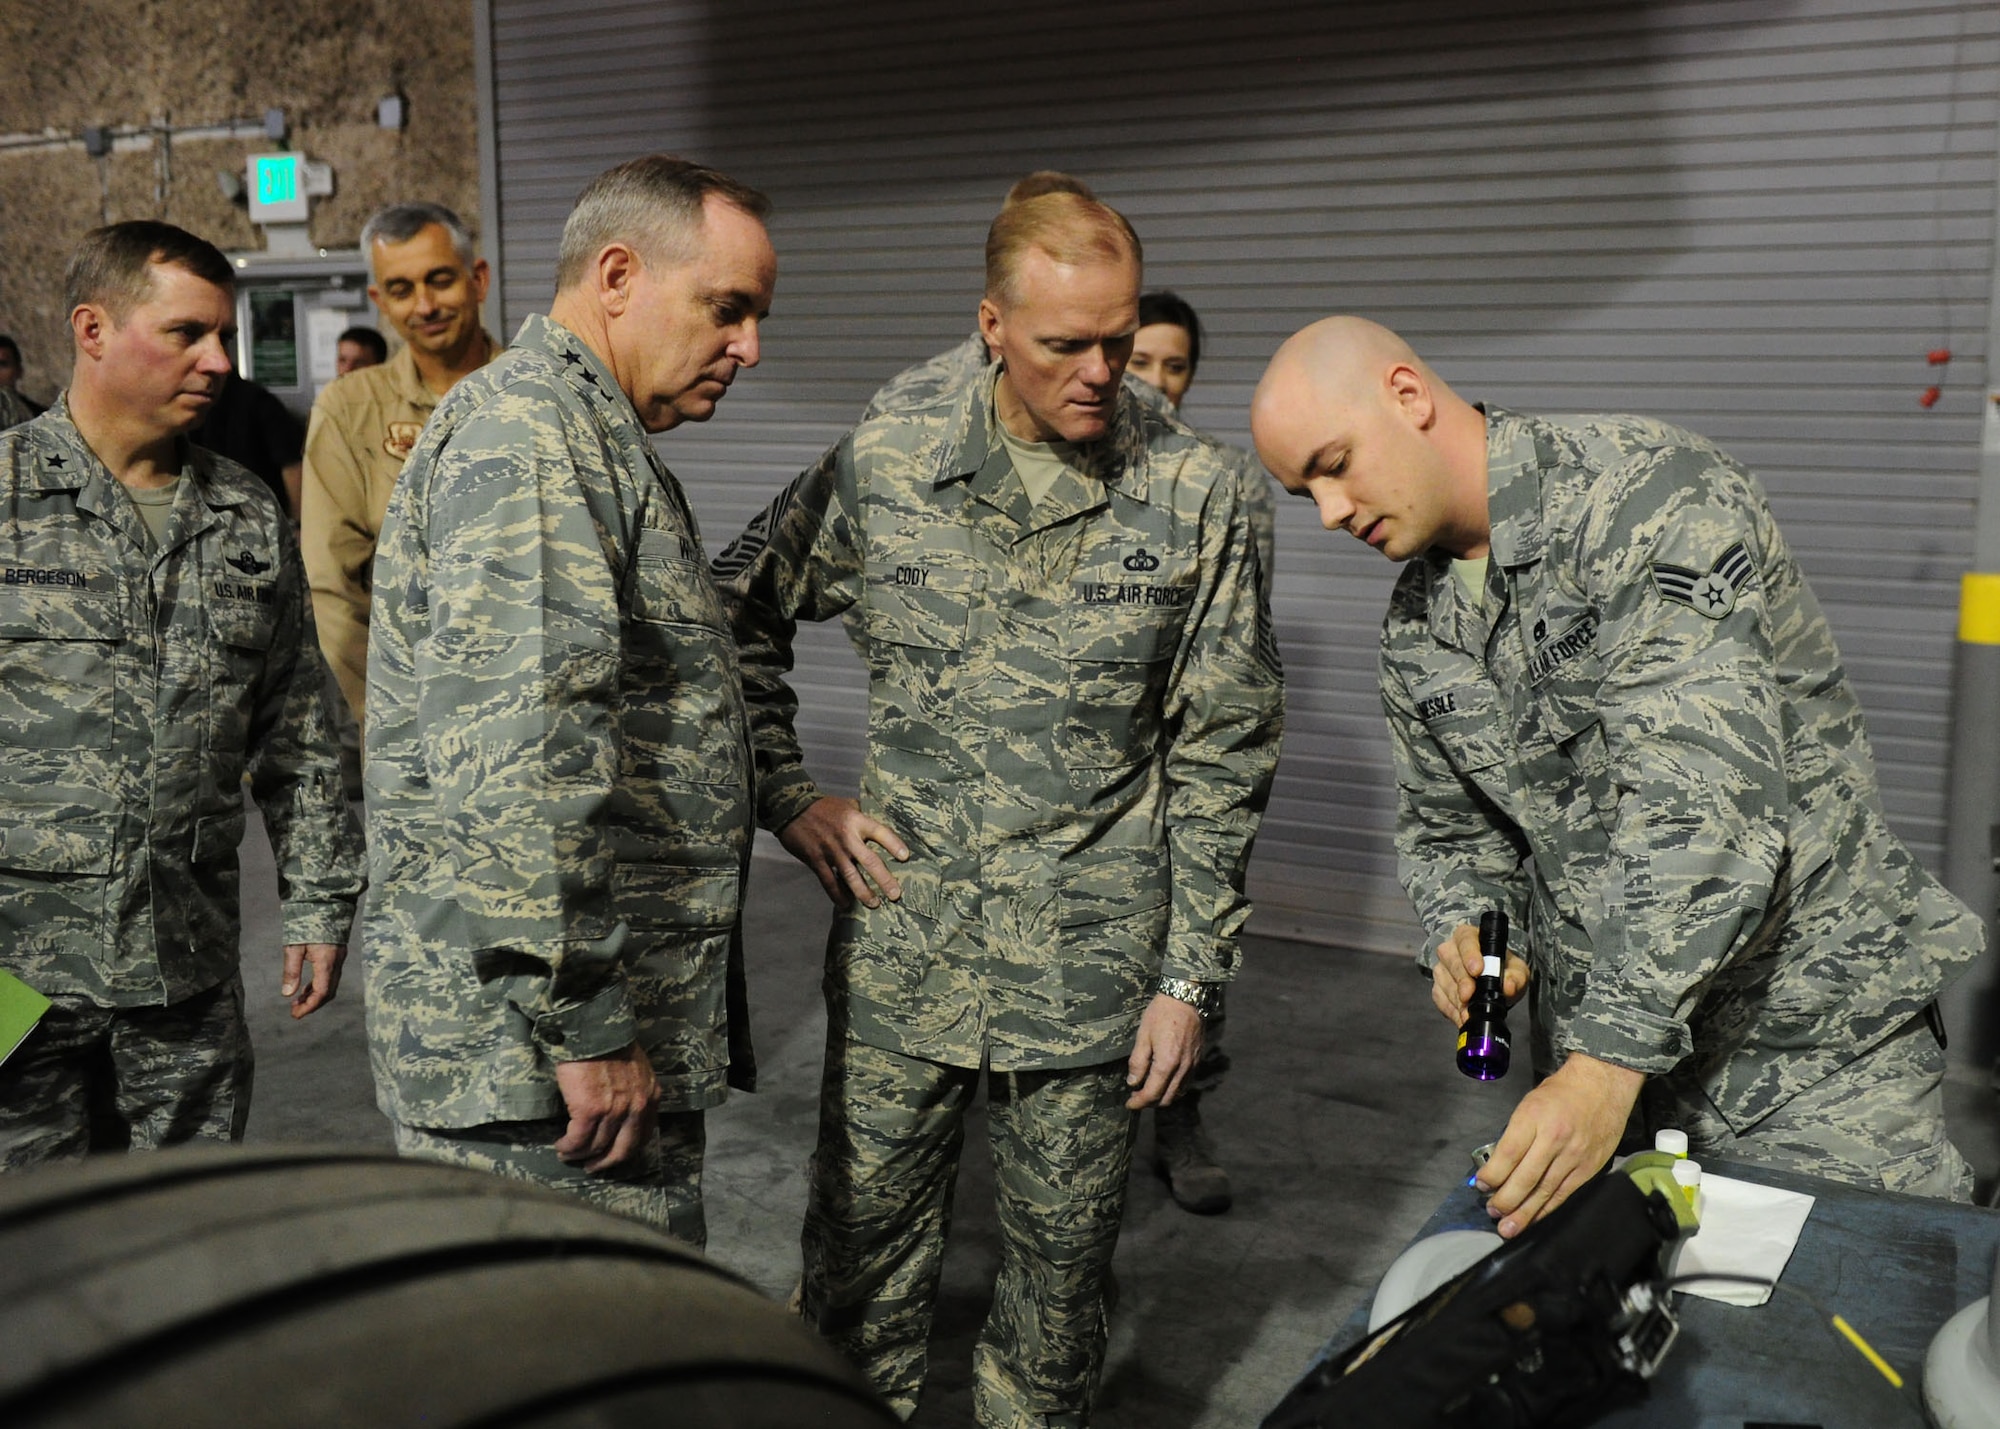 SOUTHWEST ASIA -- Senior Airman Paul Nessle, a non-destructive inspector from the 379th Expeditionary Maintenance Squadron, explains aircraft tire inspection procedures to Air Force Chief of Staff Gen. Mark A. Welsh III and Chief Master Sgt. of the Air Force James Cody during a tour of the 379th Air Expeditionary Wing. (U.S. Air Force photo/Master Sgt. Brendan Kavanaugh)